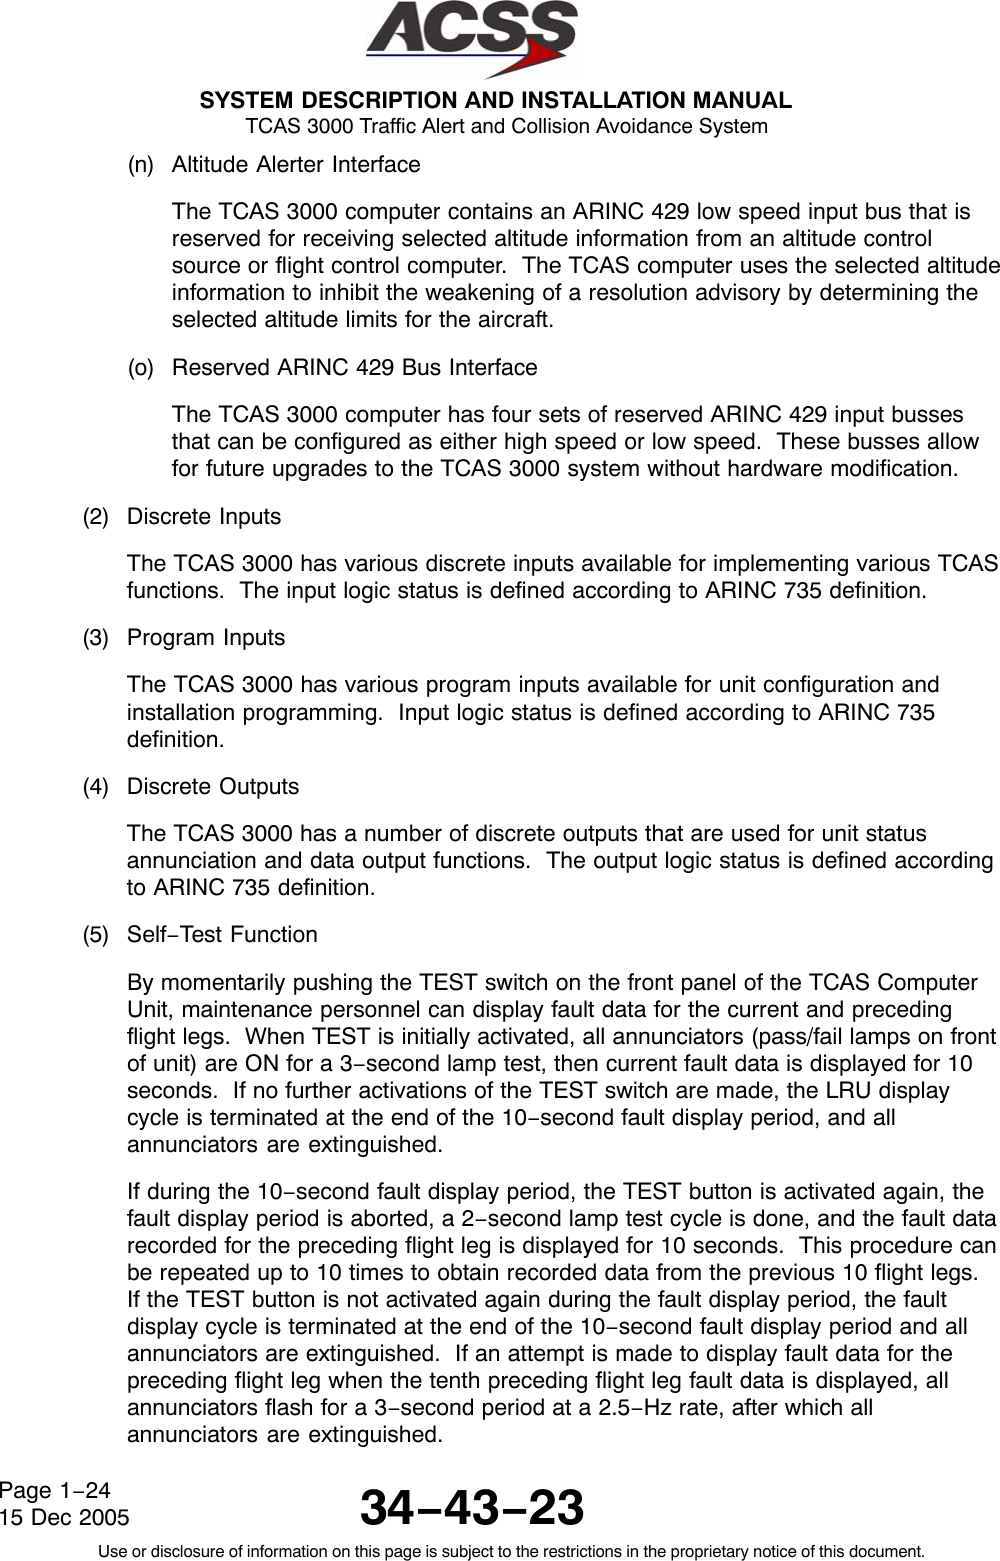  SYSTEM DESCRIPTION AND INSTALLATION MANUAL TCAS 3000 Traffic Alert and Collision Avoidance System34−43−23Use or disclosure of information on this page is subject to the restrictions in the proprietary notice of this document.Page 1−2415 Dec 2005(n) Altitude Alerter InterfaceThe TCAS 3000 computer contains an ARINC 429 low speed input bus that isreserved for receiving selected altitude information from an altitude controlsource or flight control computer.  The TCAS computer uses the selected altitudeinformation to inhibit the weakening of a resolution advisory by determining theselected altitude limits for the aircraft.(o) Reserved ARINC 429 Bus InterfaceThe TCAS 3000 computer has four sets of reserved ARINC 429 input bussesthat can be configured as either high speed or low speed.  These busses allowfor future upgrades to the TCAS 3000 system without hardware modification.(2) Discrete InputsThe TCAS 3000 has various discrete inputs available for implementing various TCASfunctions.  The input logic status is defined according to ARINC 735 definition.(3) Program InputsThe TCAS 3000 has various program inputs available for unit configuration andinstallation programming.  Input logic status is defined according to ARINC 735definition.(4) Discrete OutputsThe TCAS 3000 has a number of discrete outputs that are used for unit statusannunciation and data output functions.  The output logic status is defined accordingto ARINC 735 definition.(5) Self−Test FunctionBy momentarily pushing the TEST switch on the front panel of the TCAS ComputerUnit, maintenance personnel can display fault data for the current and precedingflight legs.  When TEST is initially activated, all annunciators (pass/fail lamps on frontof unit) are ON for a 3−second lamp test, then current fault data is displayed for 10seconds.  If no further activations of the TEST switch are made, the LRU displaycycle is terminated at the end of the 10−second fault display period, and allannunciators are extinguished.If during the 10−second fault display period, the TEST button is activated again, thefault display period is aborted, a 2−second lamp test cycle is done, and the fault datarecorded for the preceding flight leg is displayed for 10 seconds.  This procedure canbe repeated up to 10 times to obtain recorded data from the previous 10 flight legs.If the TEST button is not activated again during the fault display period, the faultdisplay cycle is terminated at the end of the 10−second fault display period and allannunciators are extinguished.  If an attempt is made to display fault data for thepreceding flight leg when the tenth preceding flight leg fault data is displayed, allannunciators flash for a 3−second period at a 2.5−Hz rate, after which allannunciators are extinguished.